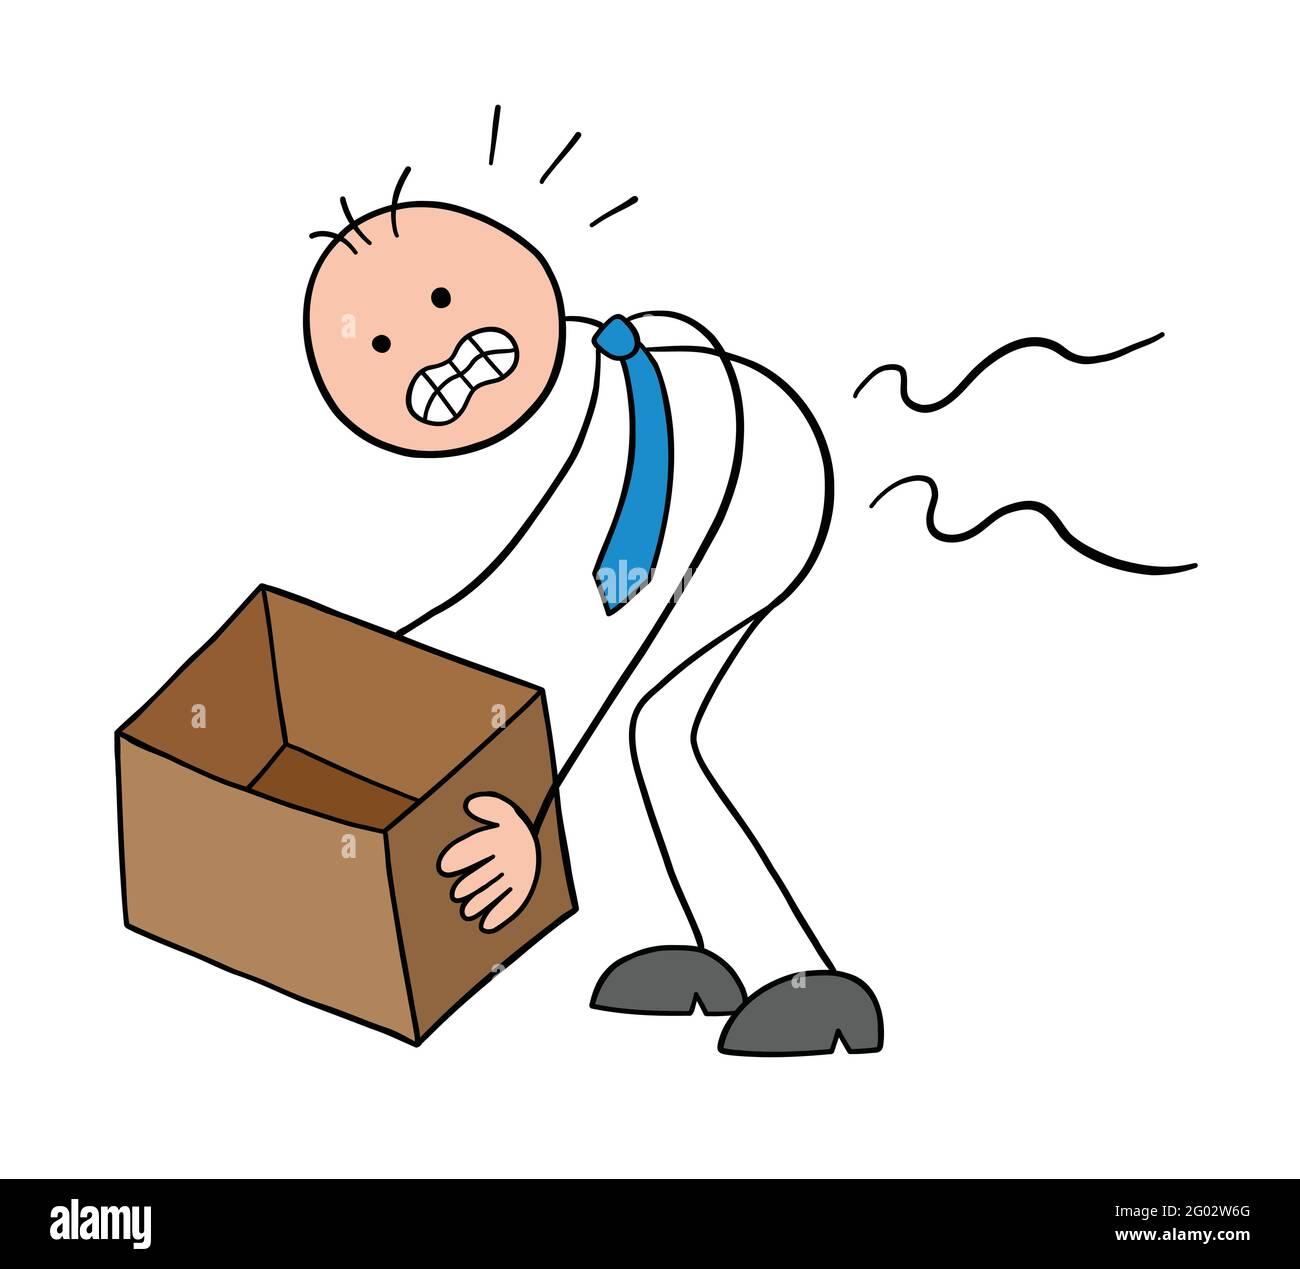 Funny back pain Stock Vector Images - Alamy